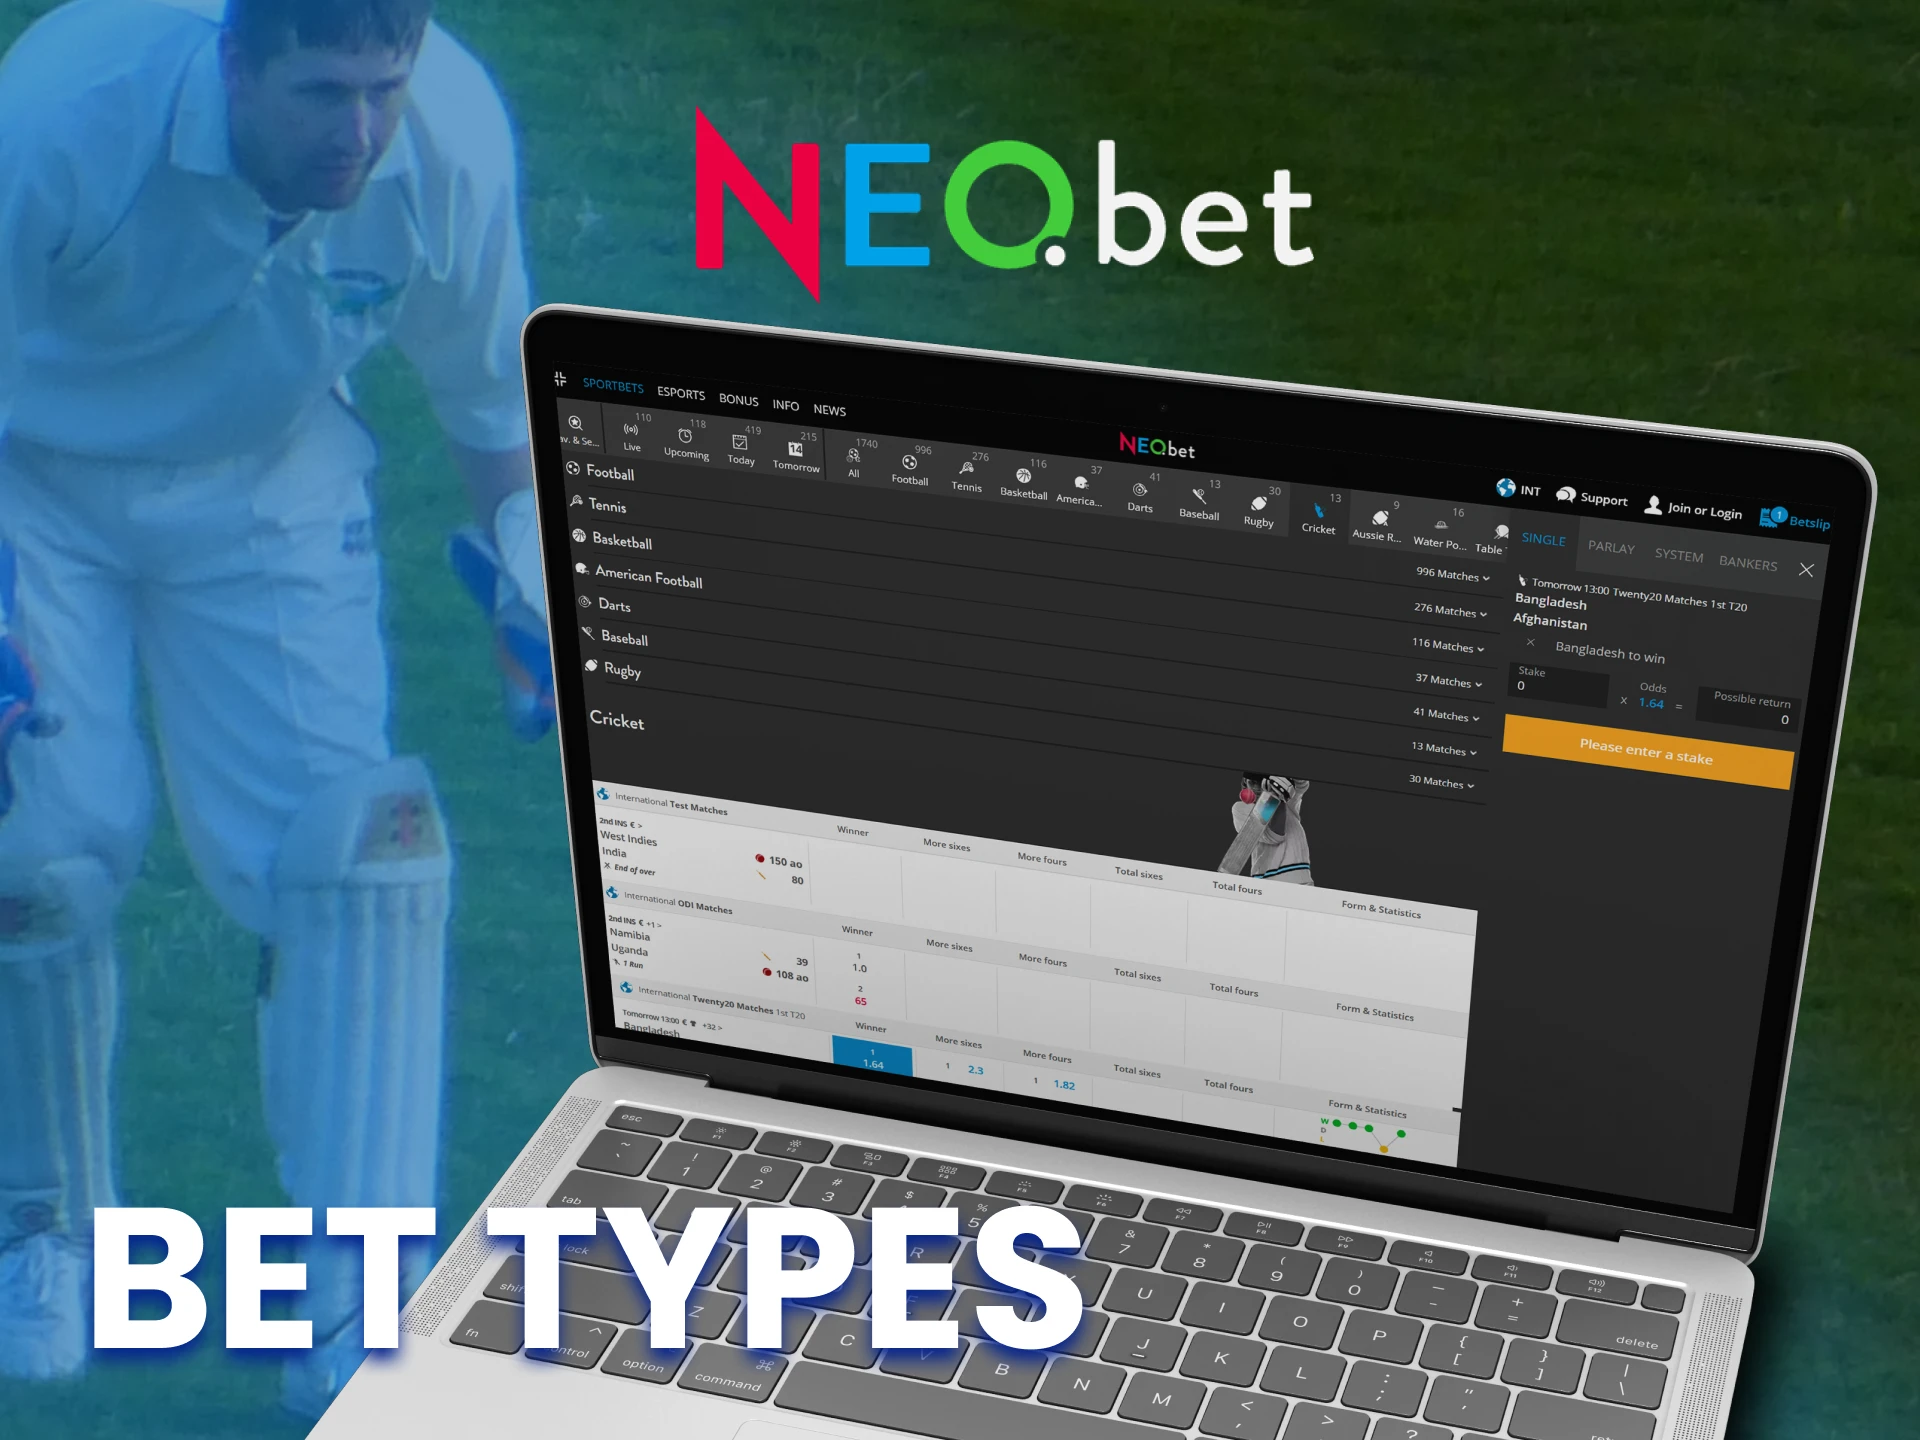 In NEO.bet, there are different types of bets available for your convenience.